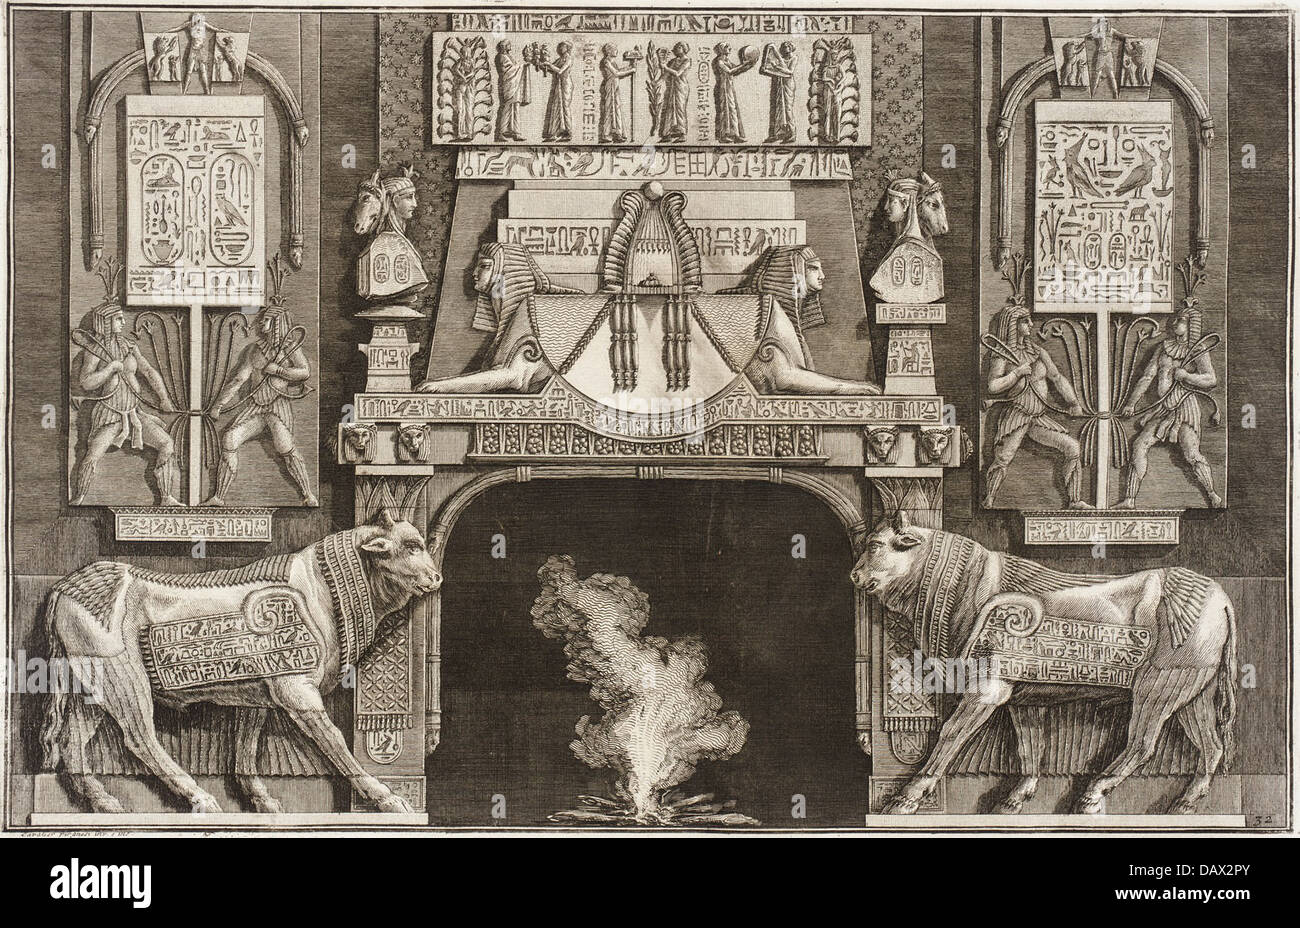 Chimneypiece in the Egyptian style- Lintel with addorsed Sphinxes flanked by bulls in profile. AC1999.142.2 Stock Photo